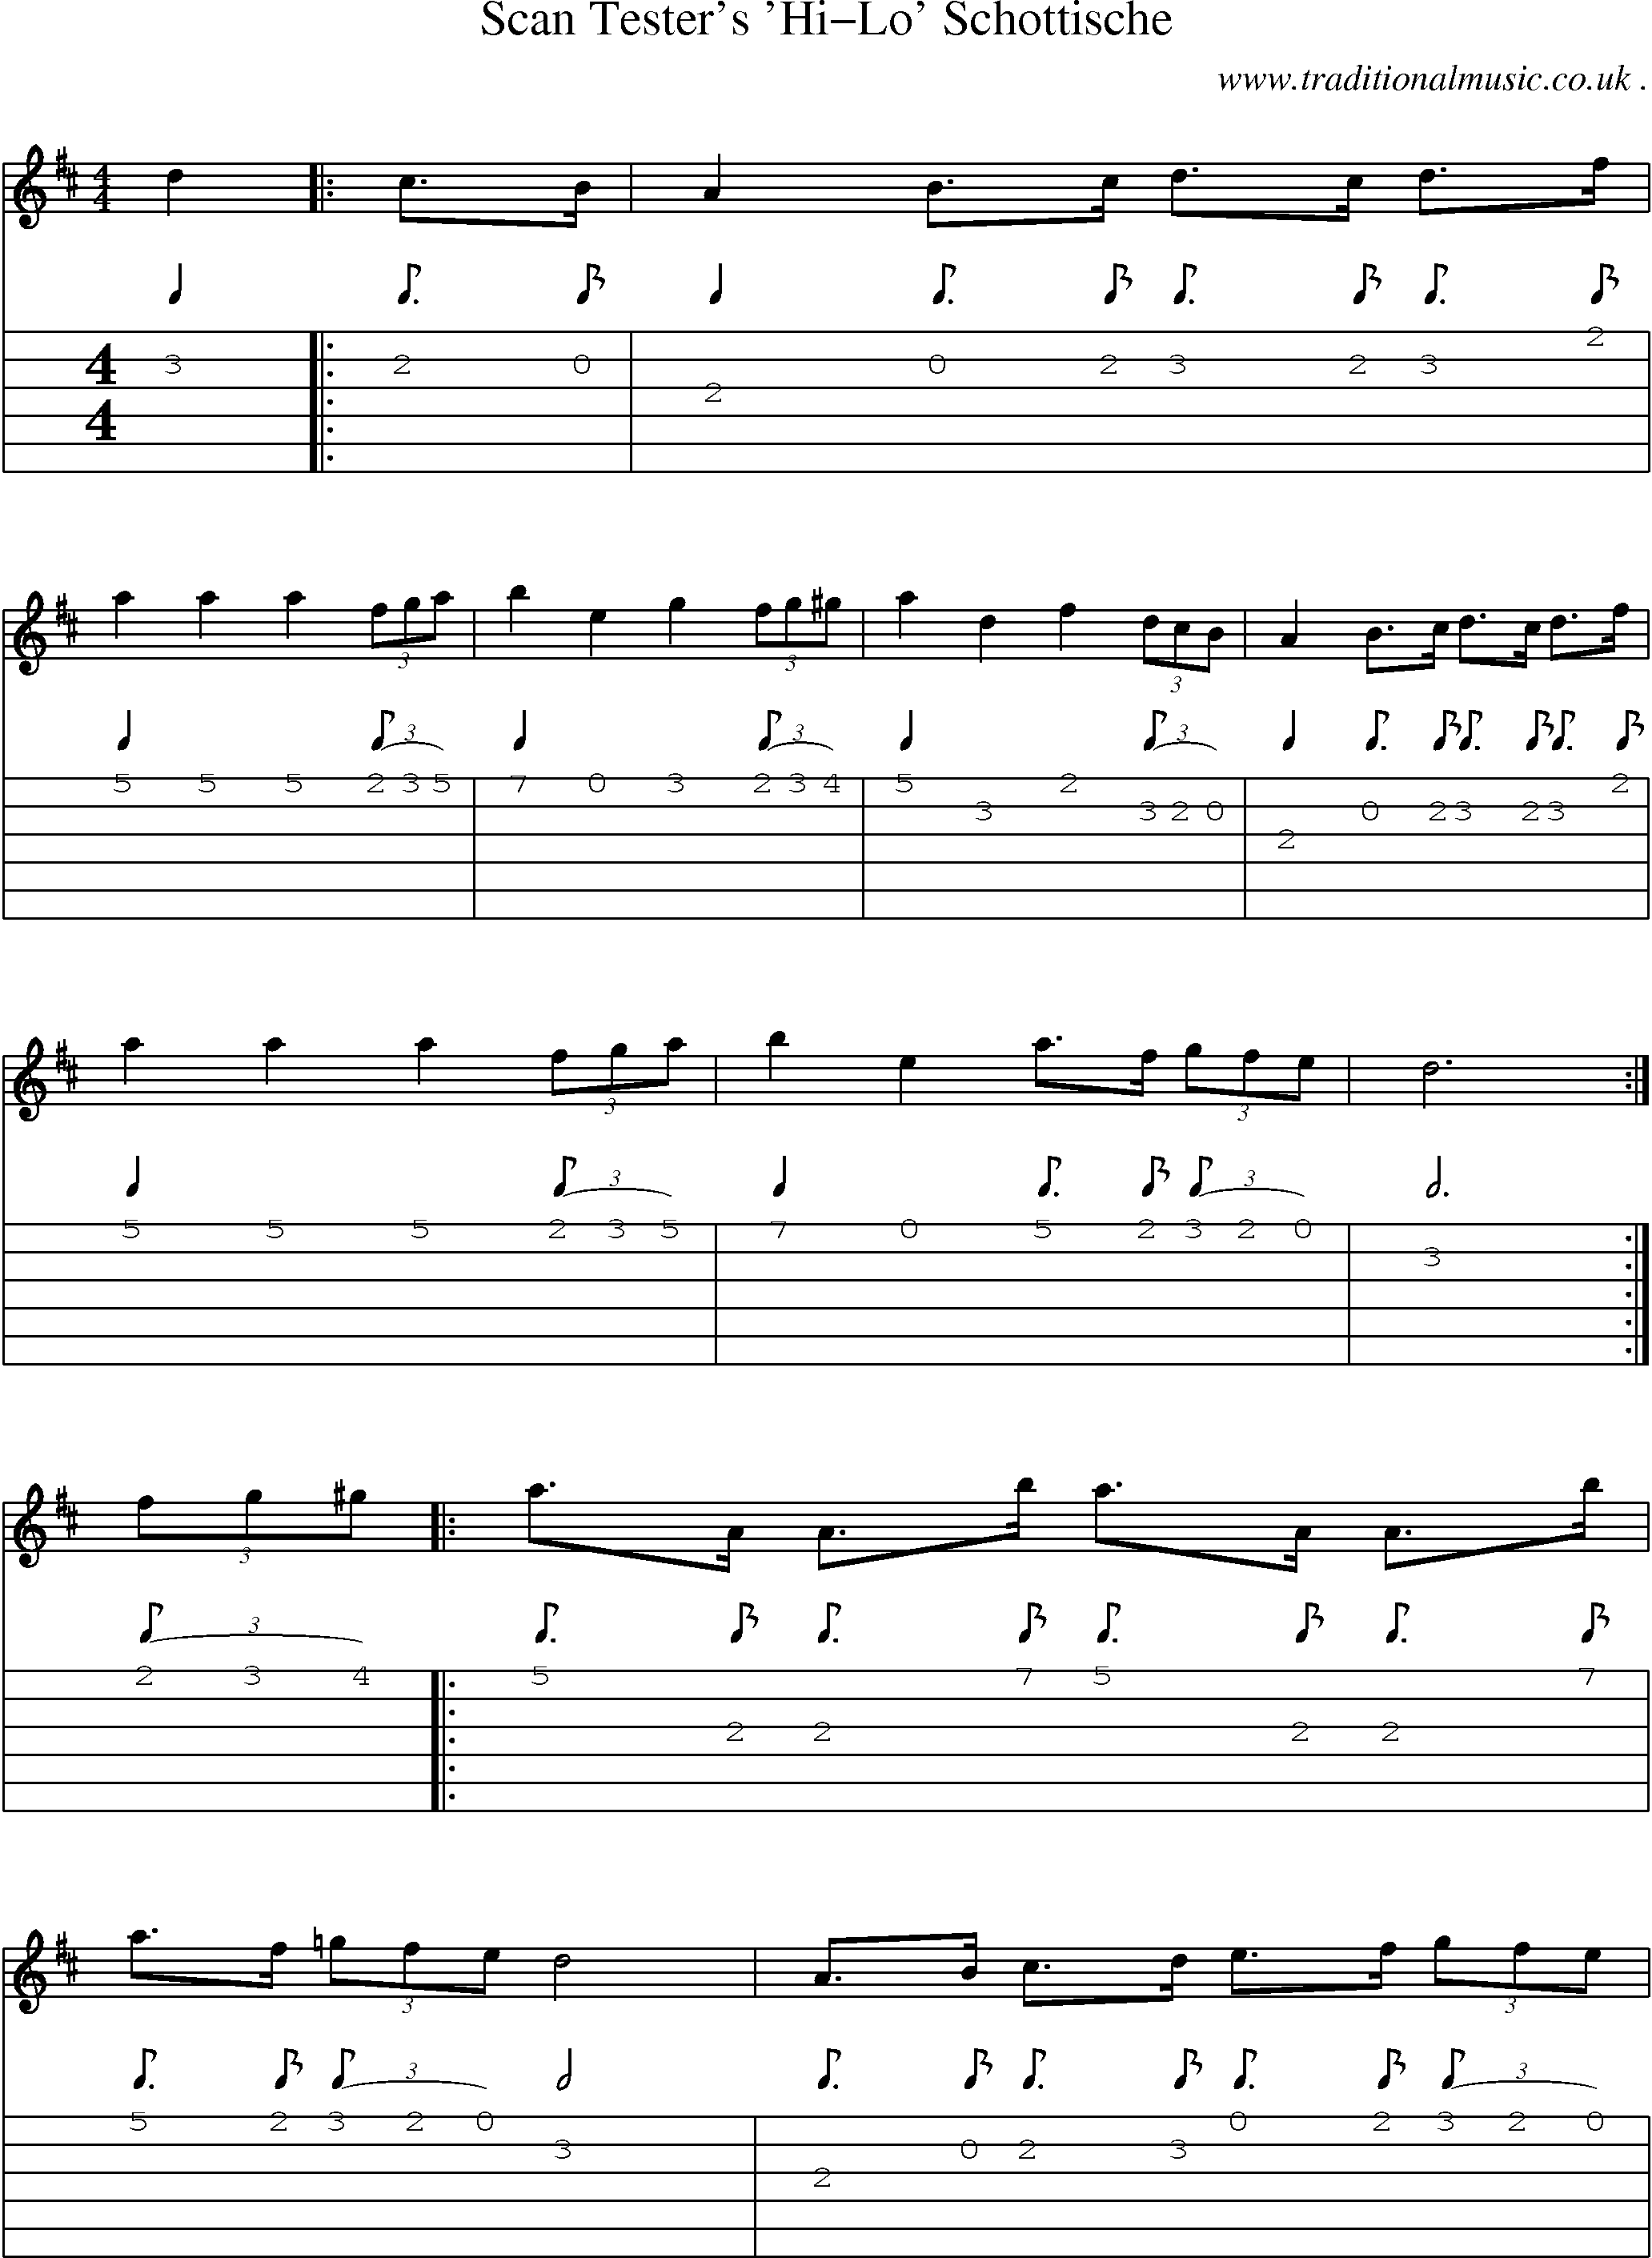 Sheet-Music and Guitar Tabs for Scan Testers Hi-lo Schottische